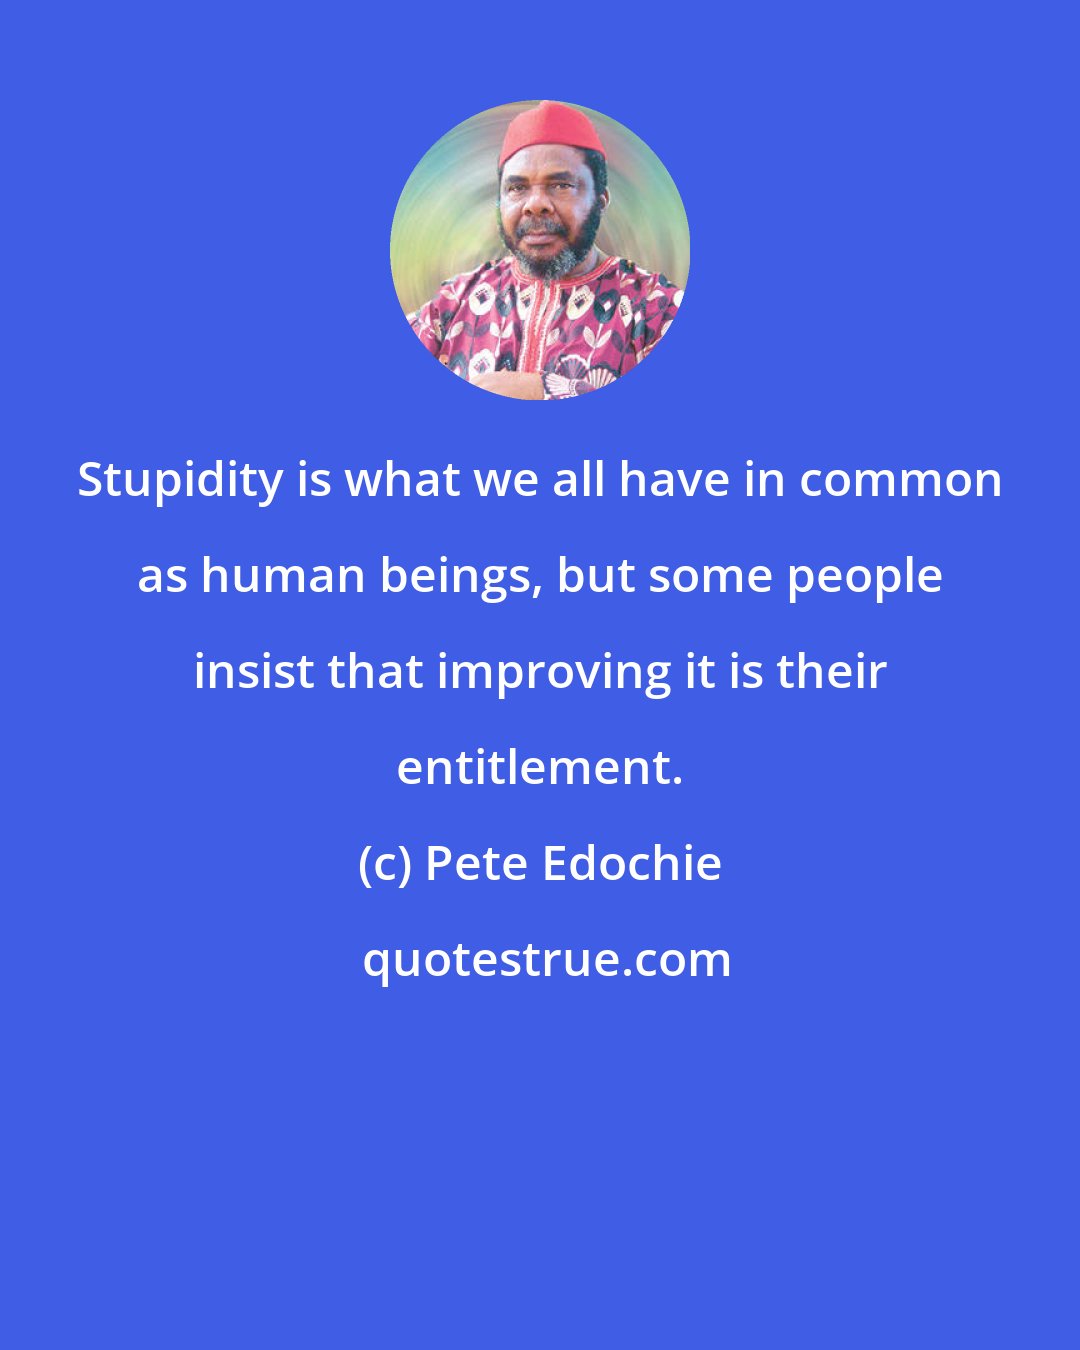 Pete Edochie: Stupidity is what we all have in common as human beings, but some people insist that improving it is their entitlement.